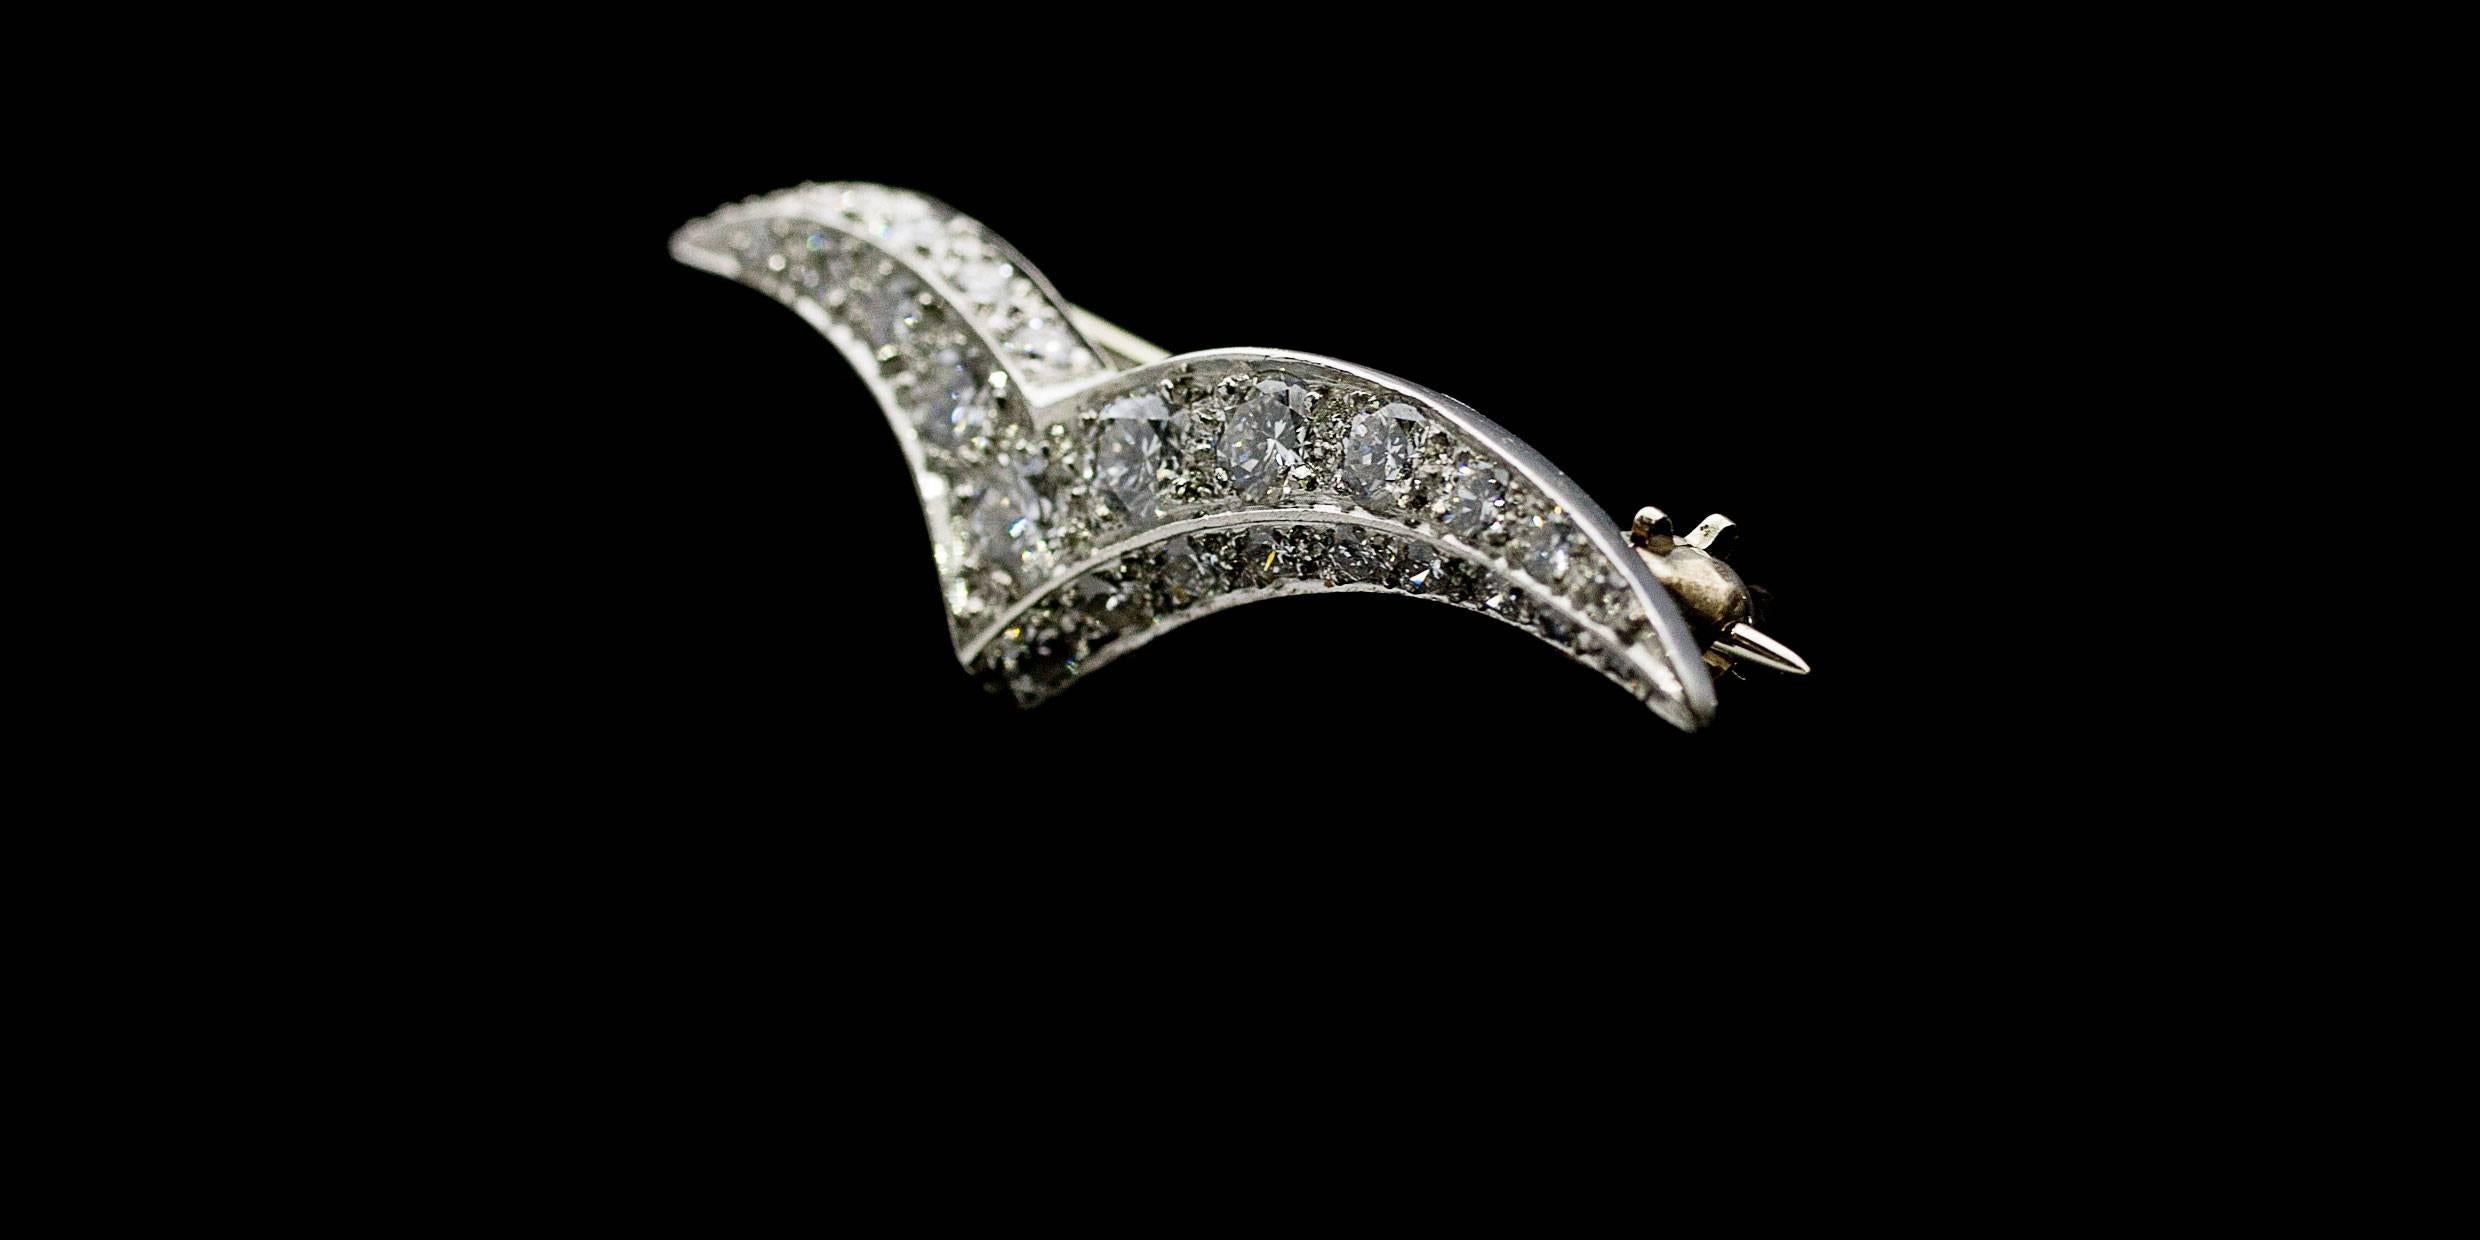 Tiffany & Co jewelry has long been admired for its quality and beauty, and this lovely vintage brooch is no exception. This brooch features .75 carats total diamond weight. The diamonds grade as EF/VVS in quality. The diamonds are set in a